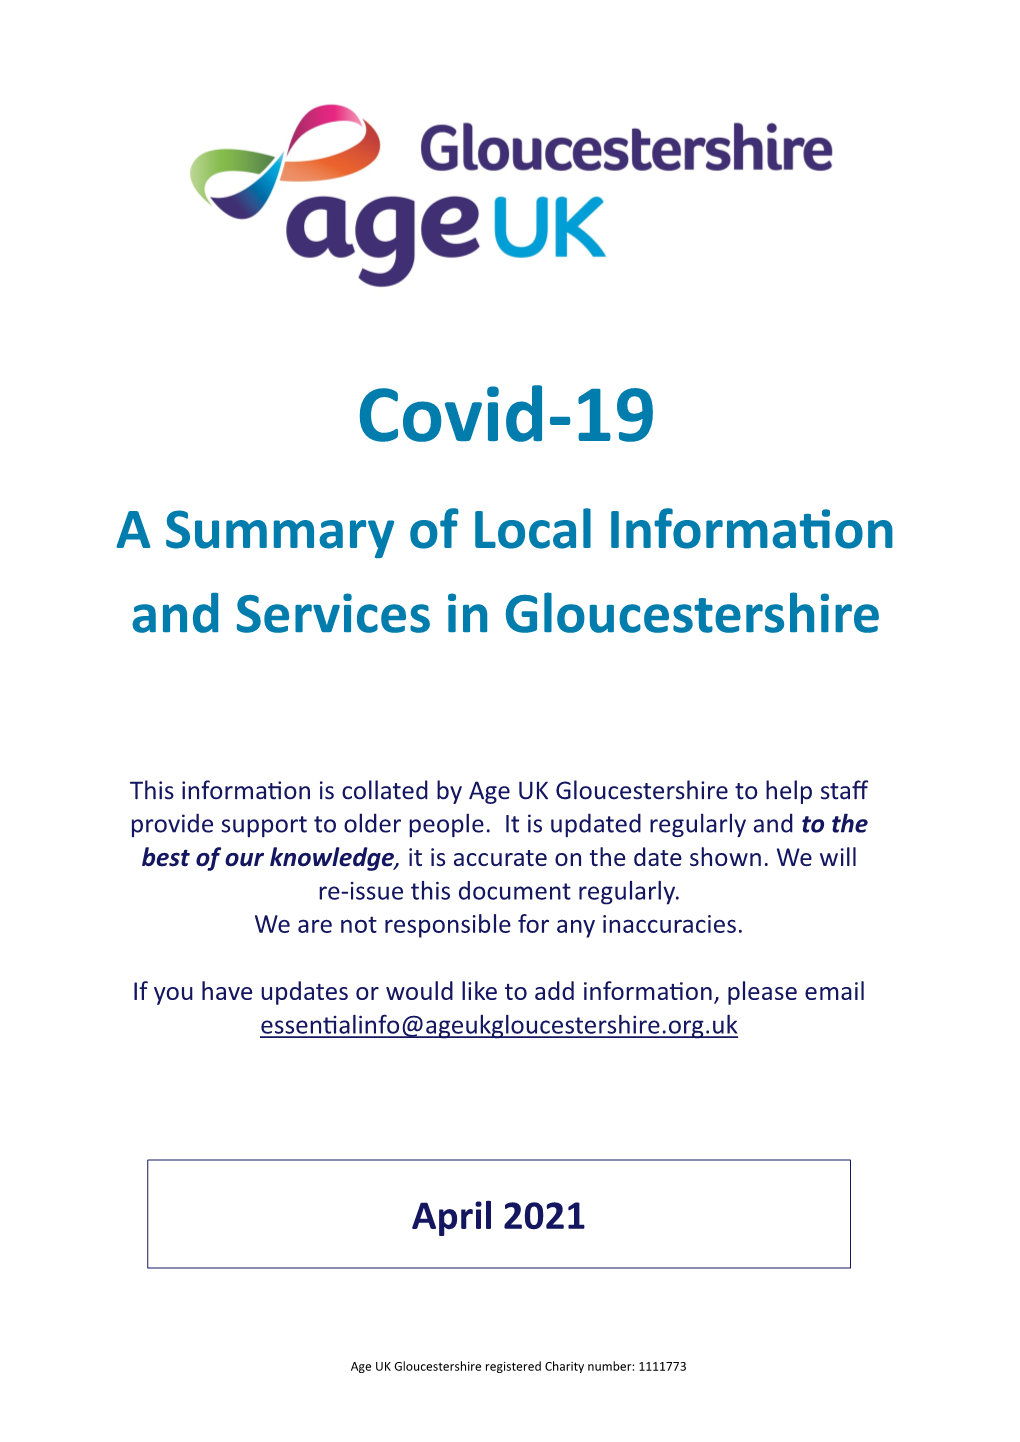 Covid-19 a Summary of Local Information and Services in Gloucestershire